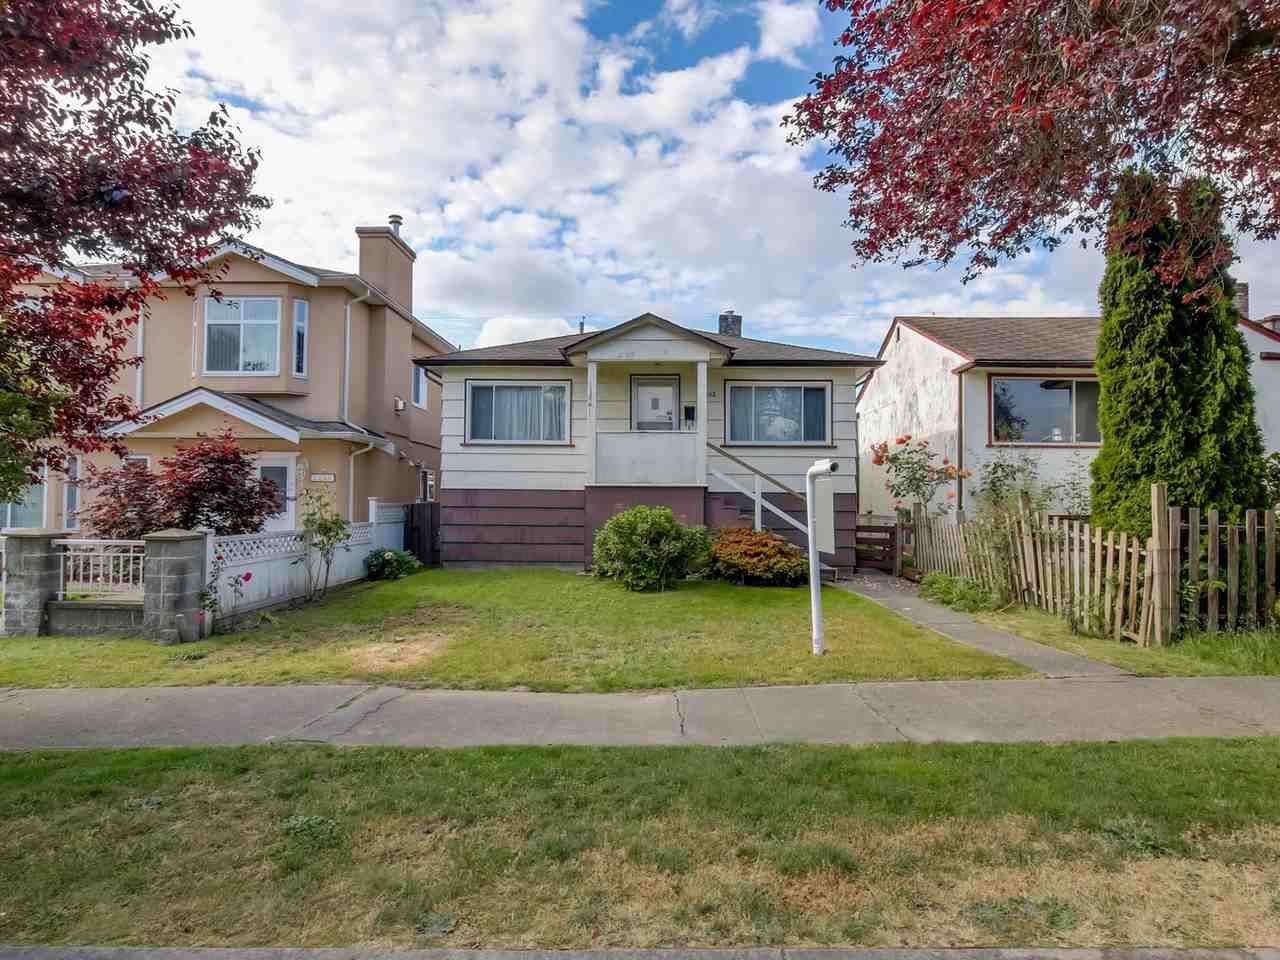 Main Photo: 3232 NAPIER STREET in Vancouver: Renfrew VE House for sale (Vancouver East)  : MLS®# R2072671